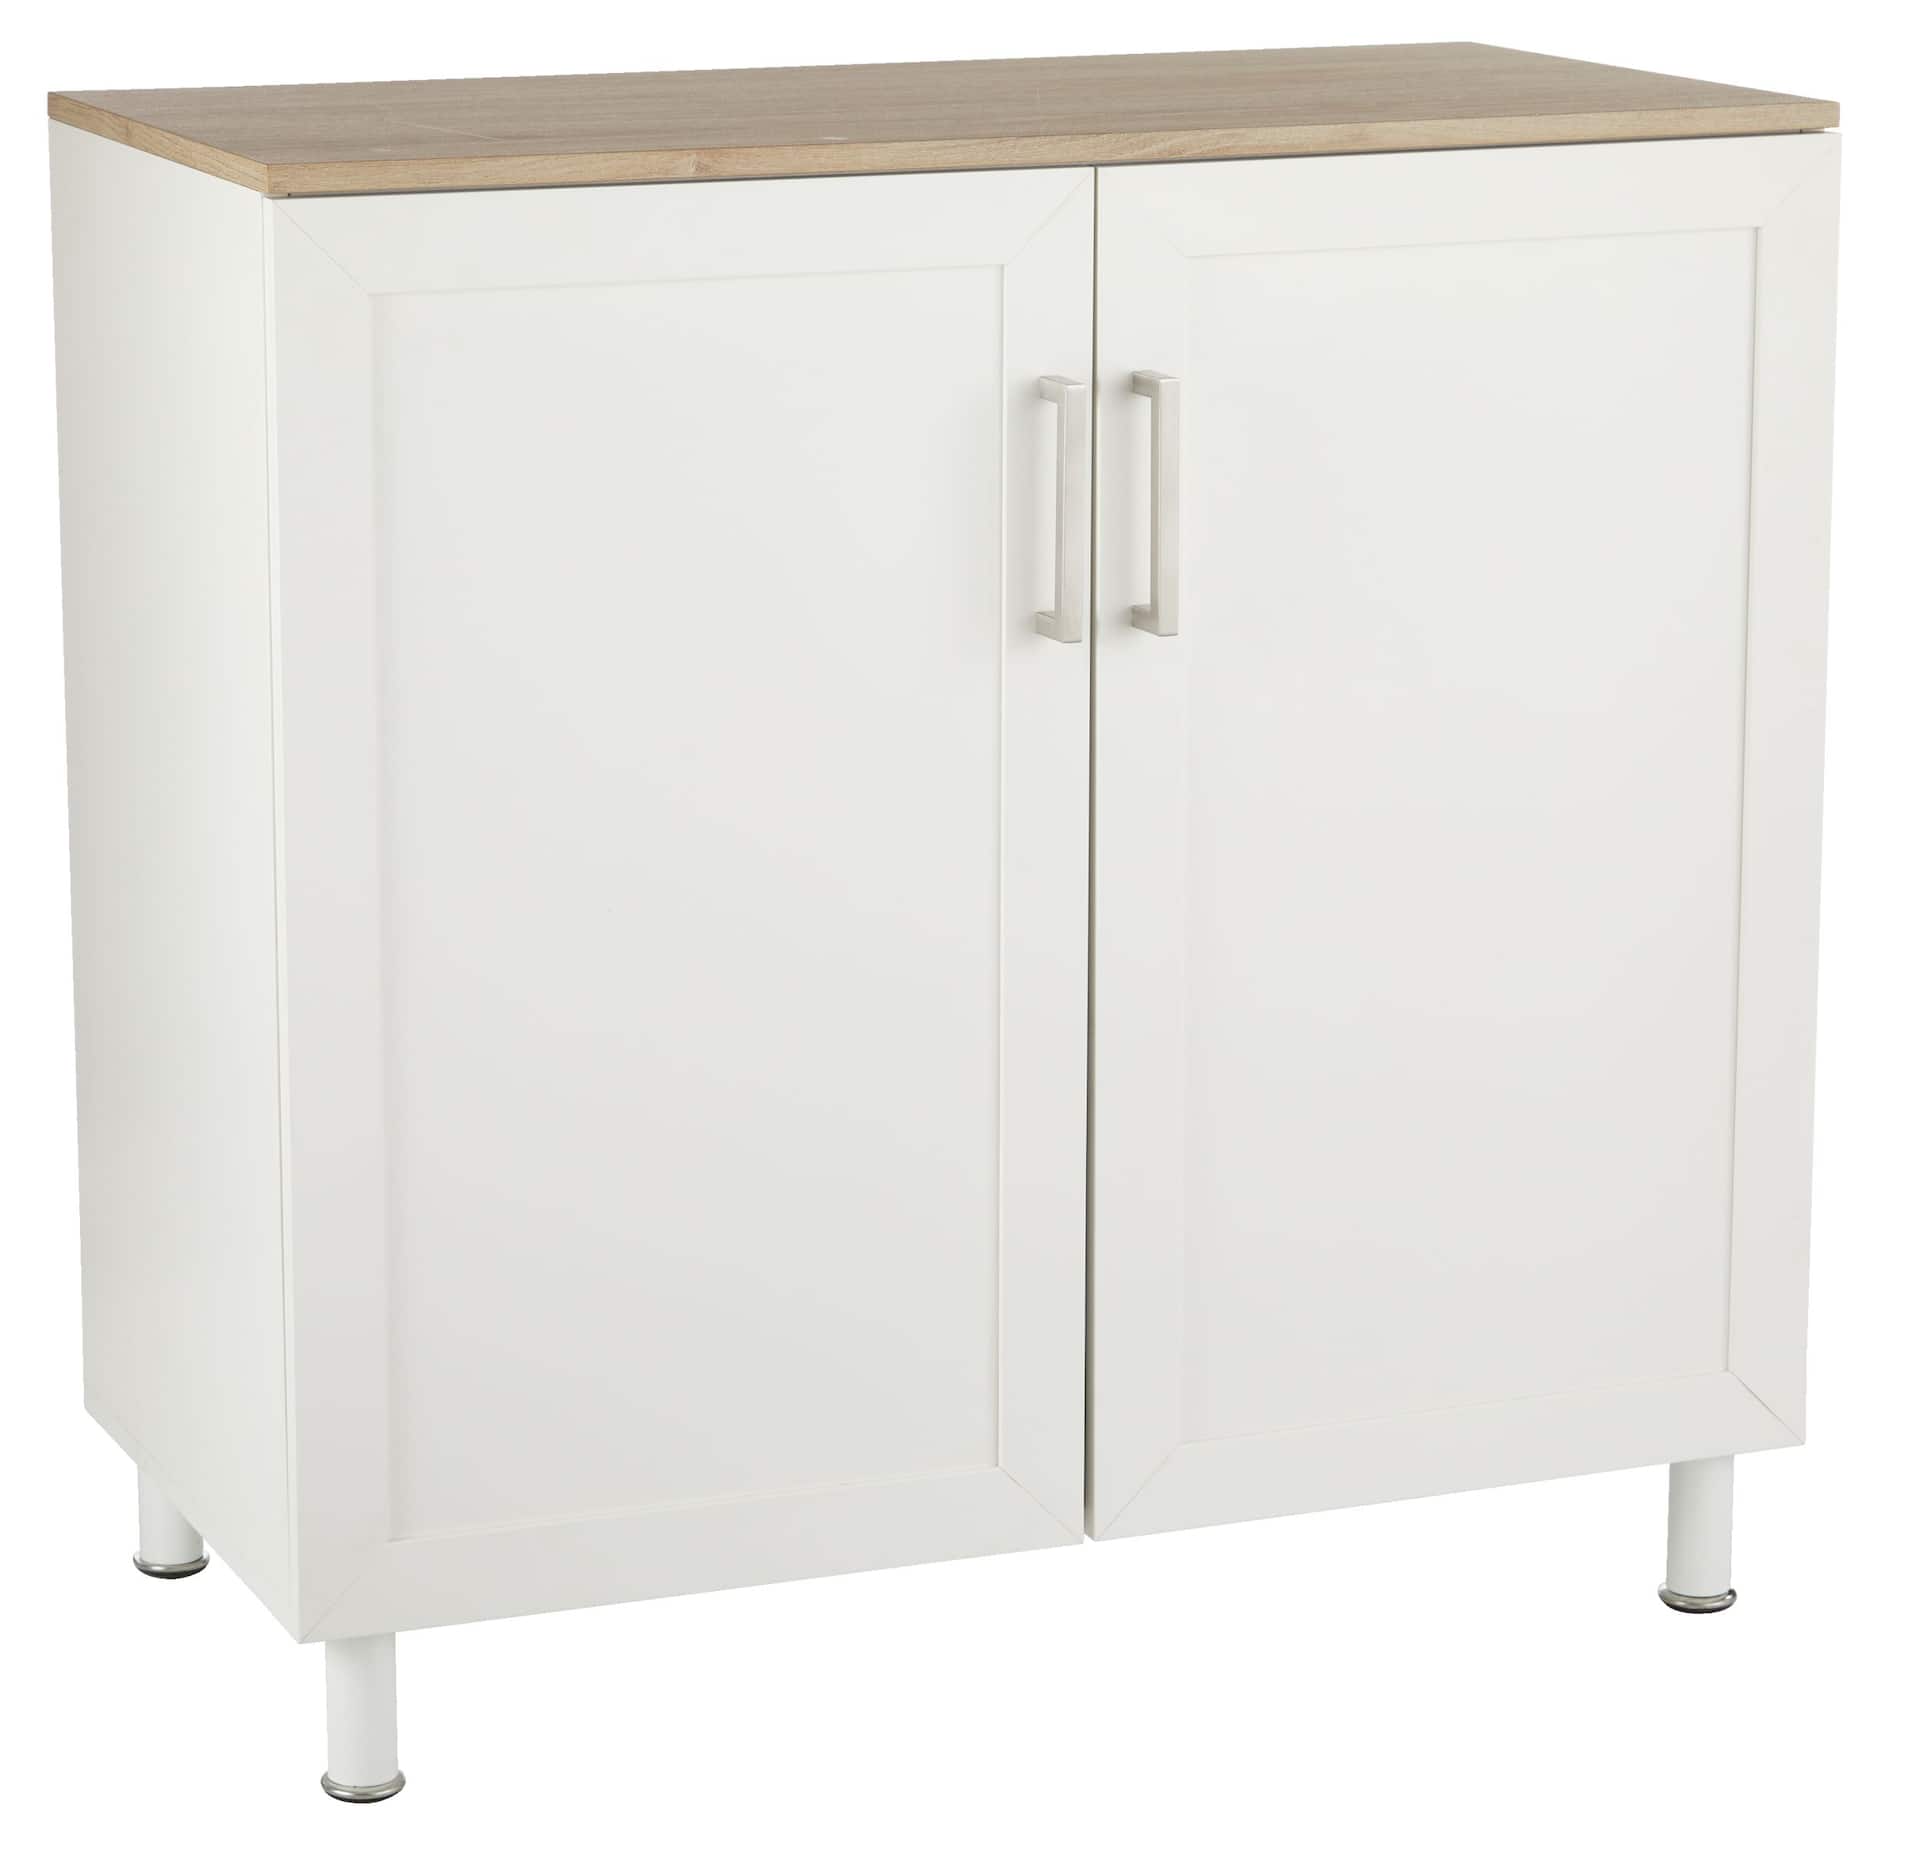 For Living 2-Door Base Laundry Cabinet, 36-in, White